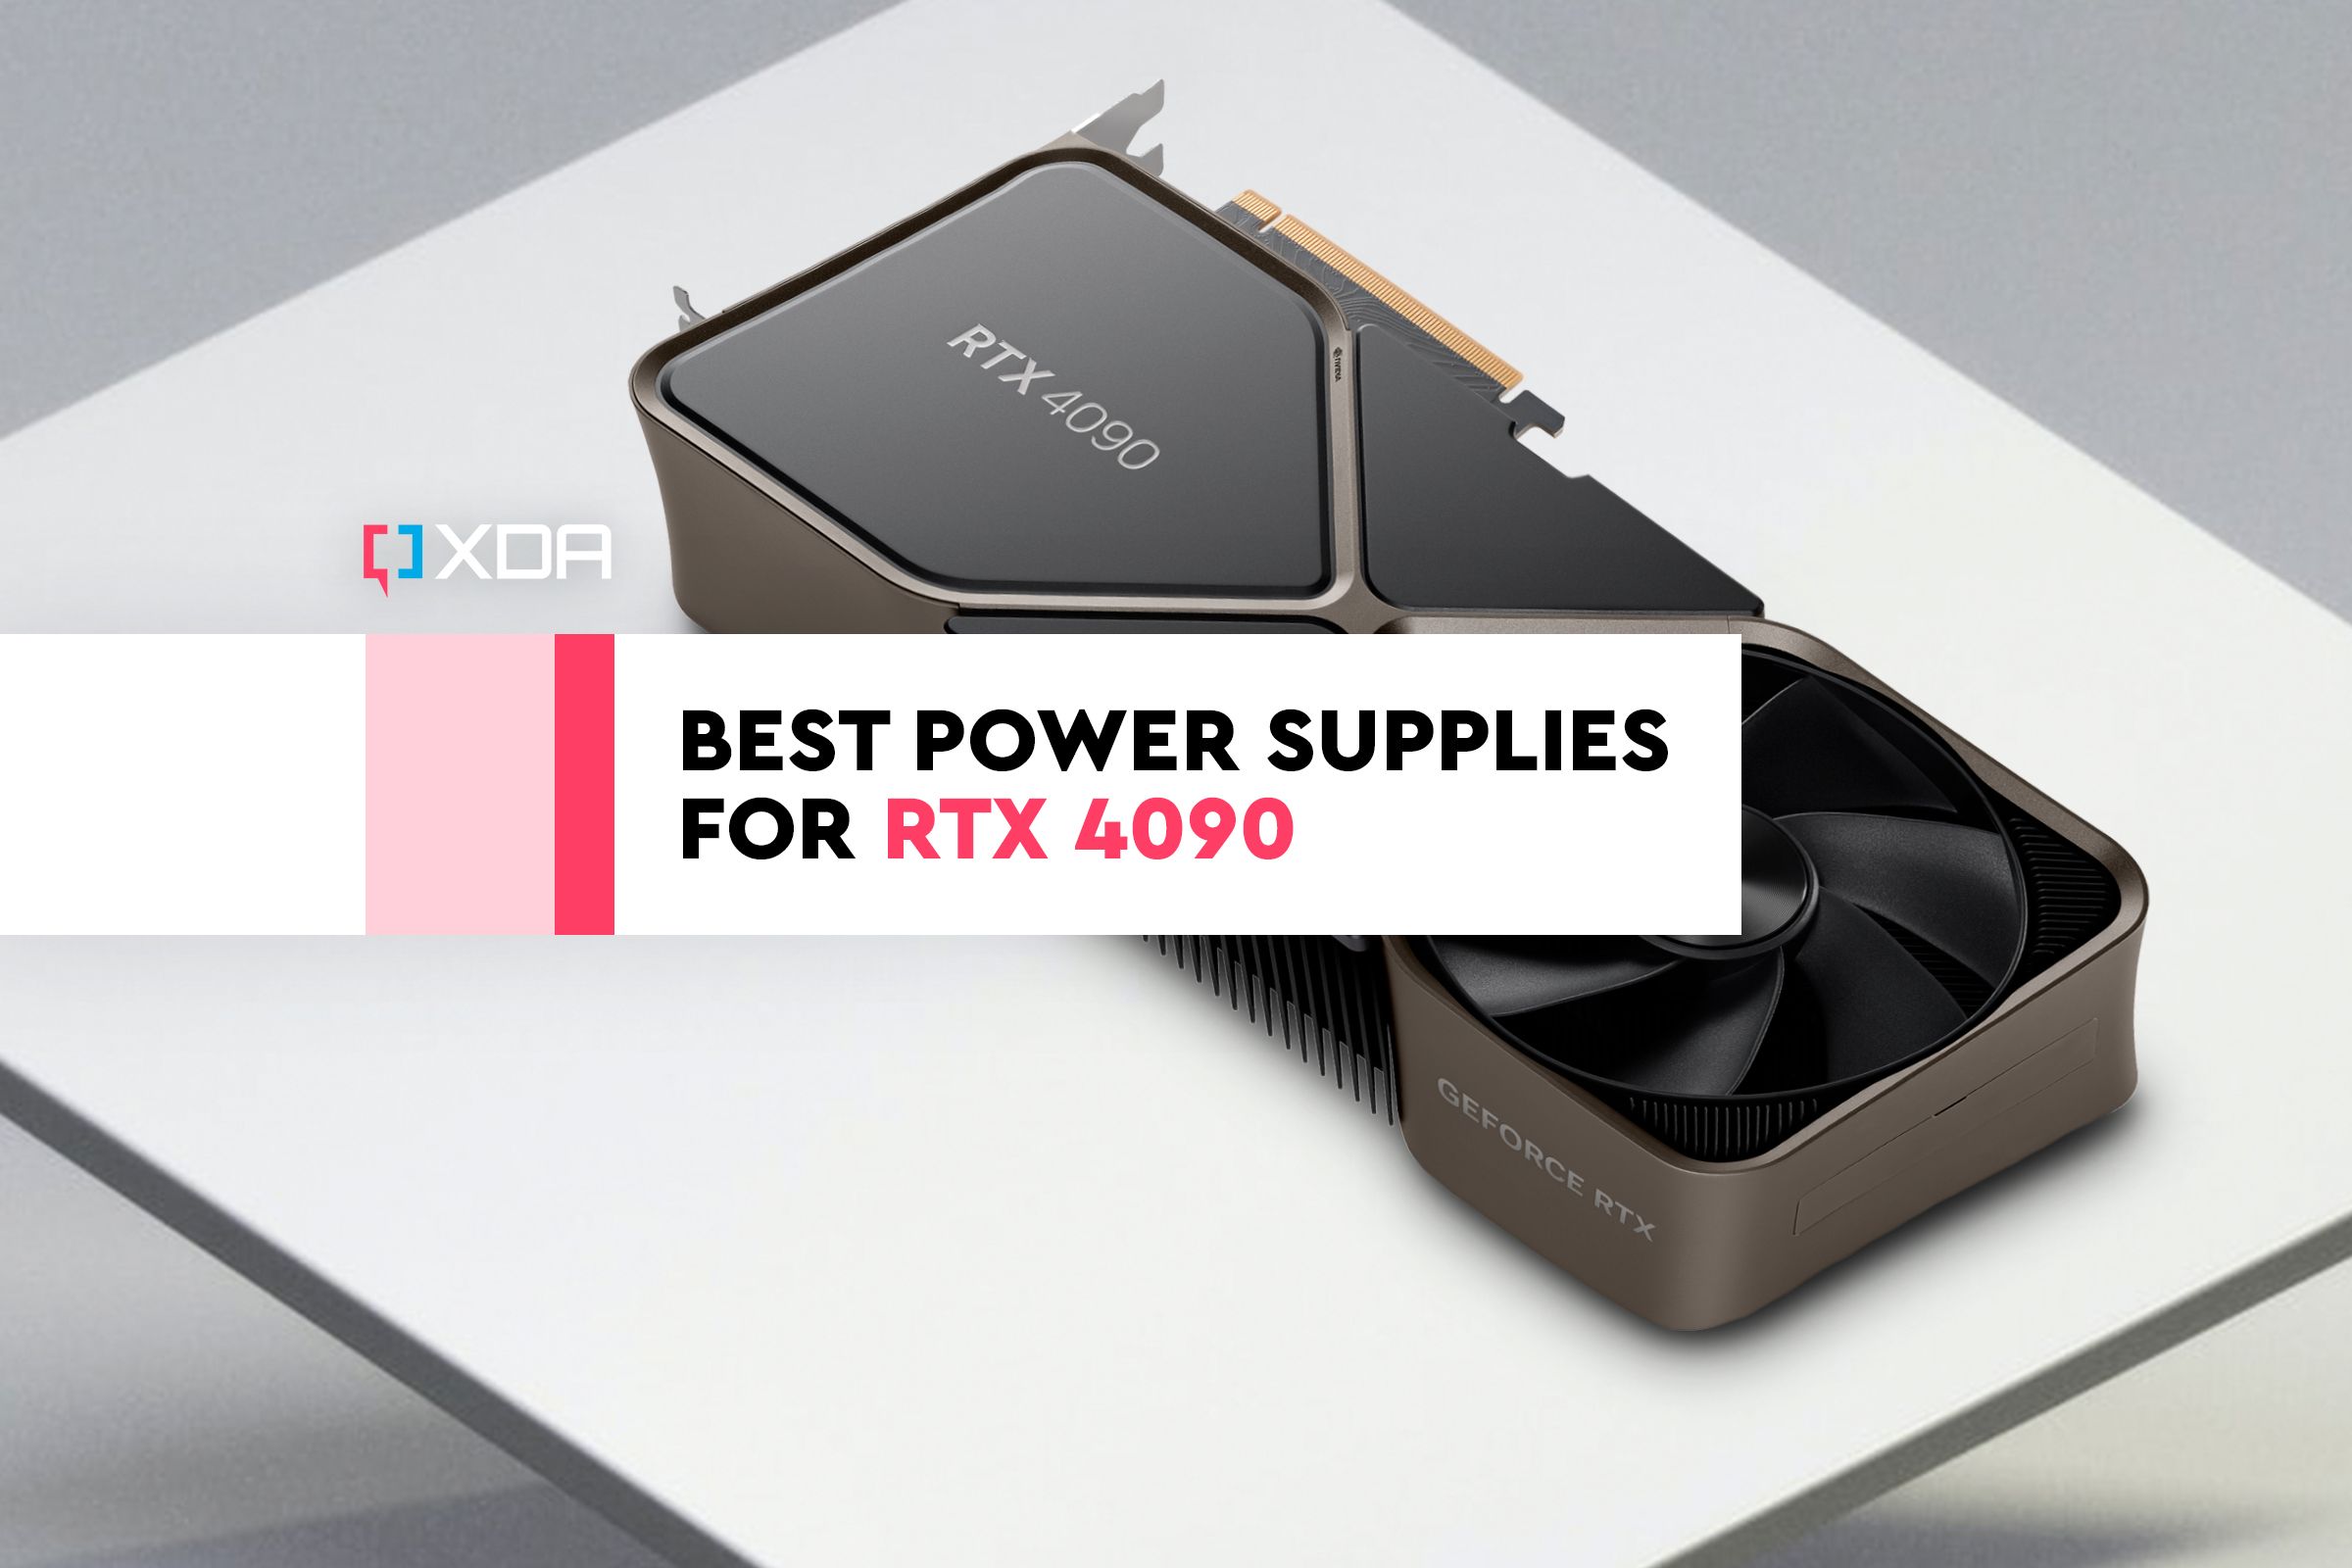 Best power supplies for RTX 4090